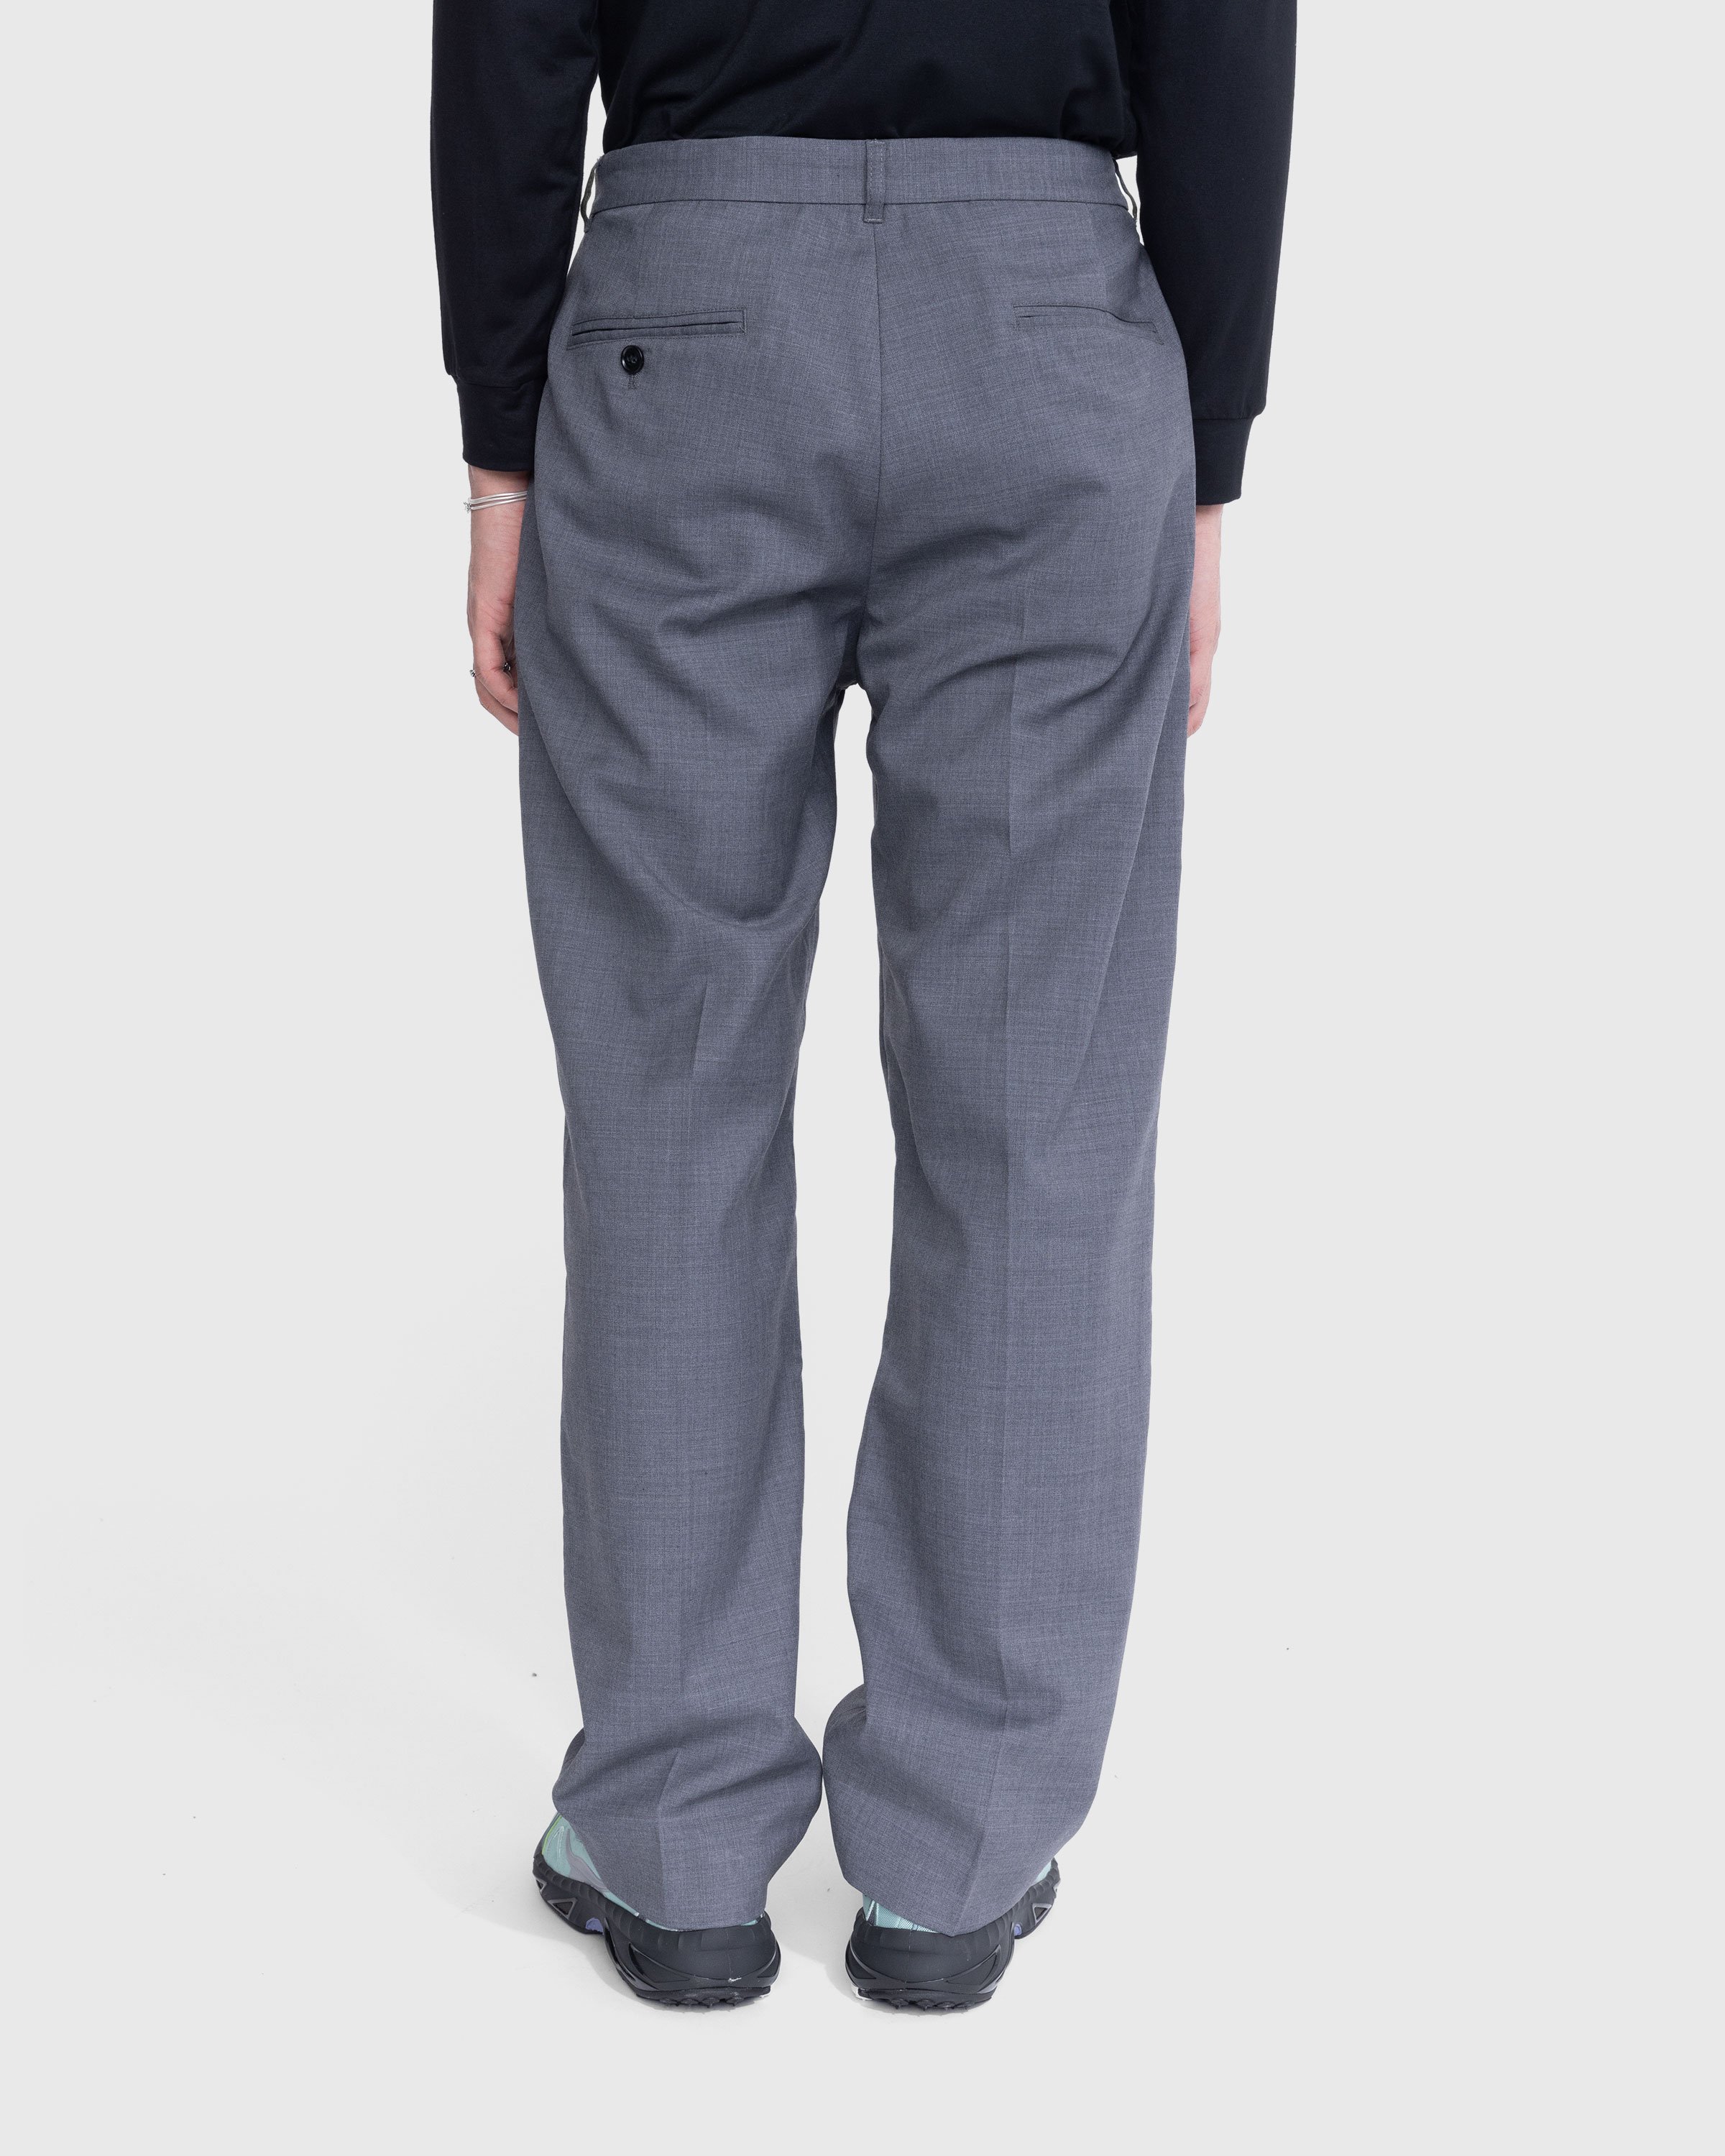 Highsnobiety - Tropical Wool Suiting Pants Grey - Clothing - Grey - Image 9